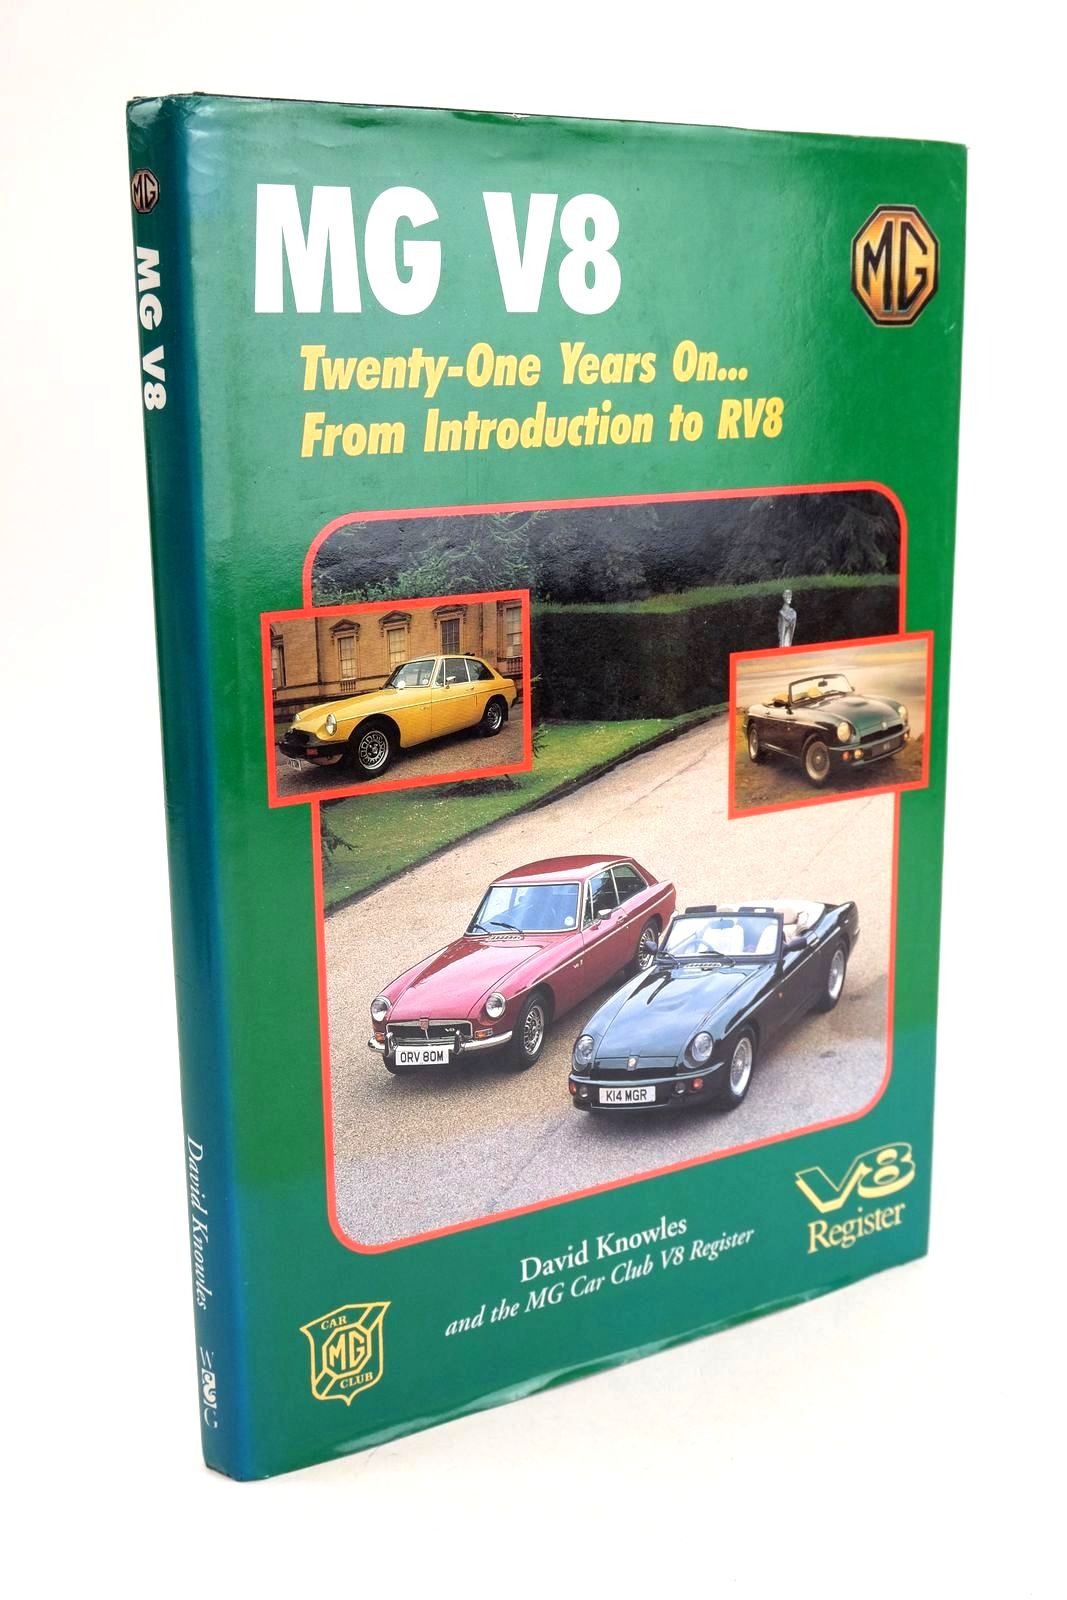 Photo of MG V8 TWENTY-ONE YEARS ON... FROM INTRODUCTION TO RV8 written by Knowles, David published by Windrow &amp; Greene (STOCK CODE: 1324132)  for sale by Stella & Rose's Books